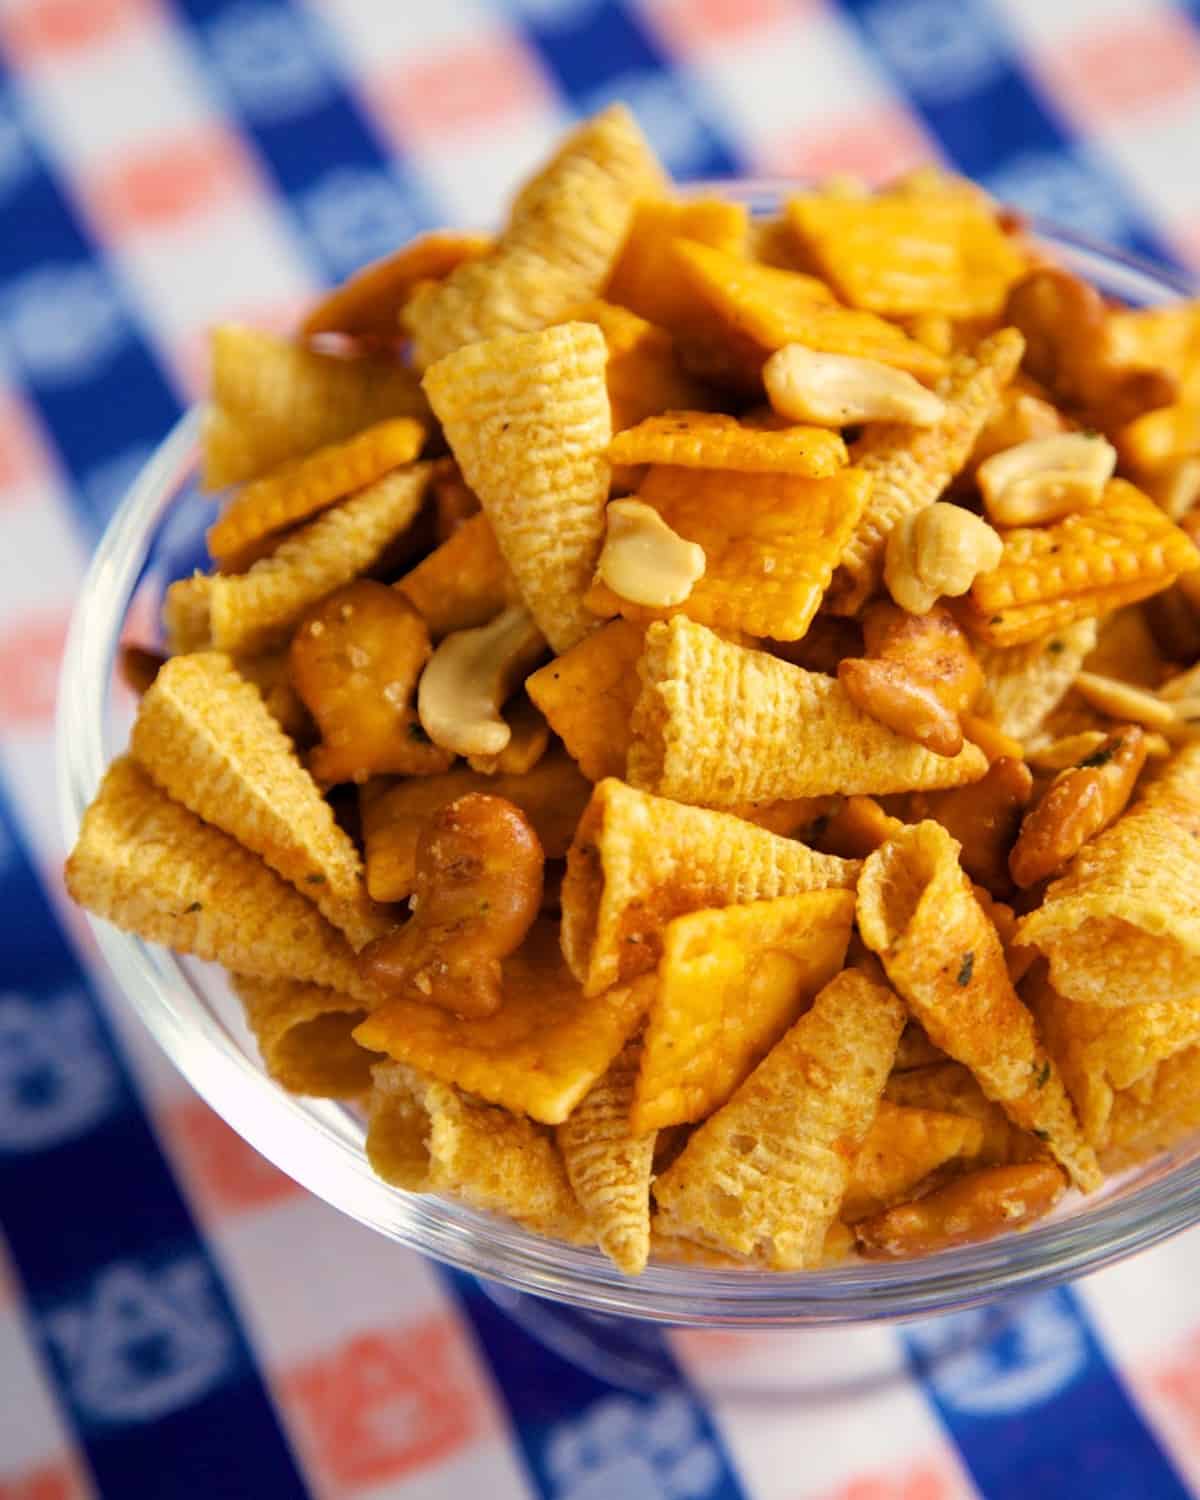 Buffalo Ranch Snack Mix - SO good! I took this to a party and it was the first thing to go. Everybody asked for the recipe!! No baking required! Bugles, Goldfish pretzels, Cheez-its, cashews, ranch dressing mix, buffalo sauce and oil. Toss together and it is ready to eat! #snack #tailgating #nobake #partyfood #appetizer